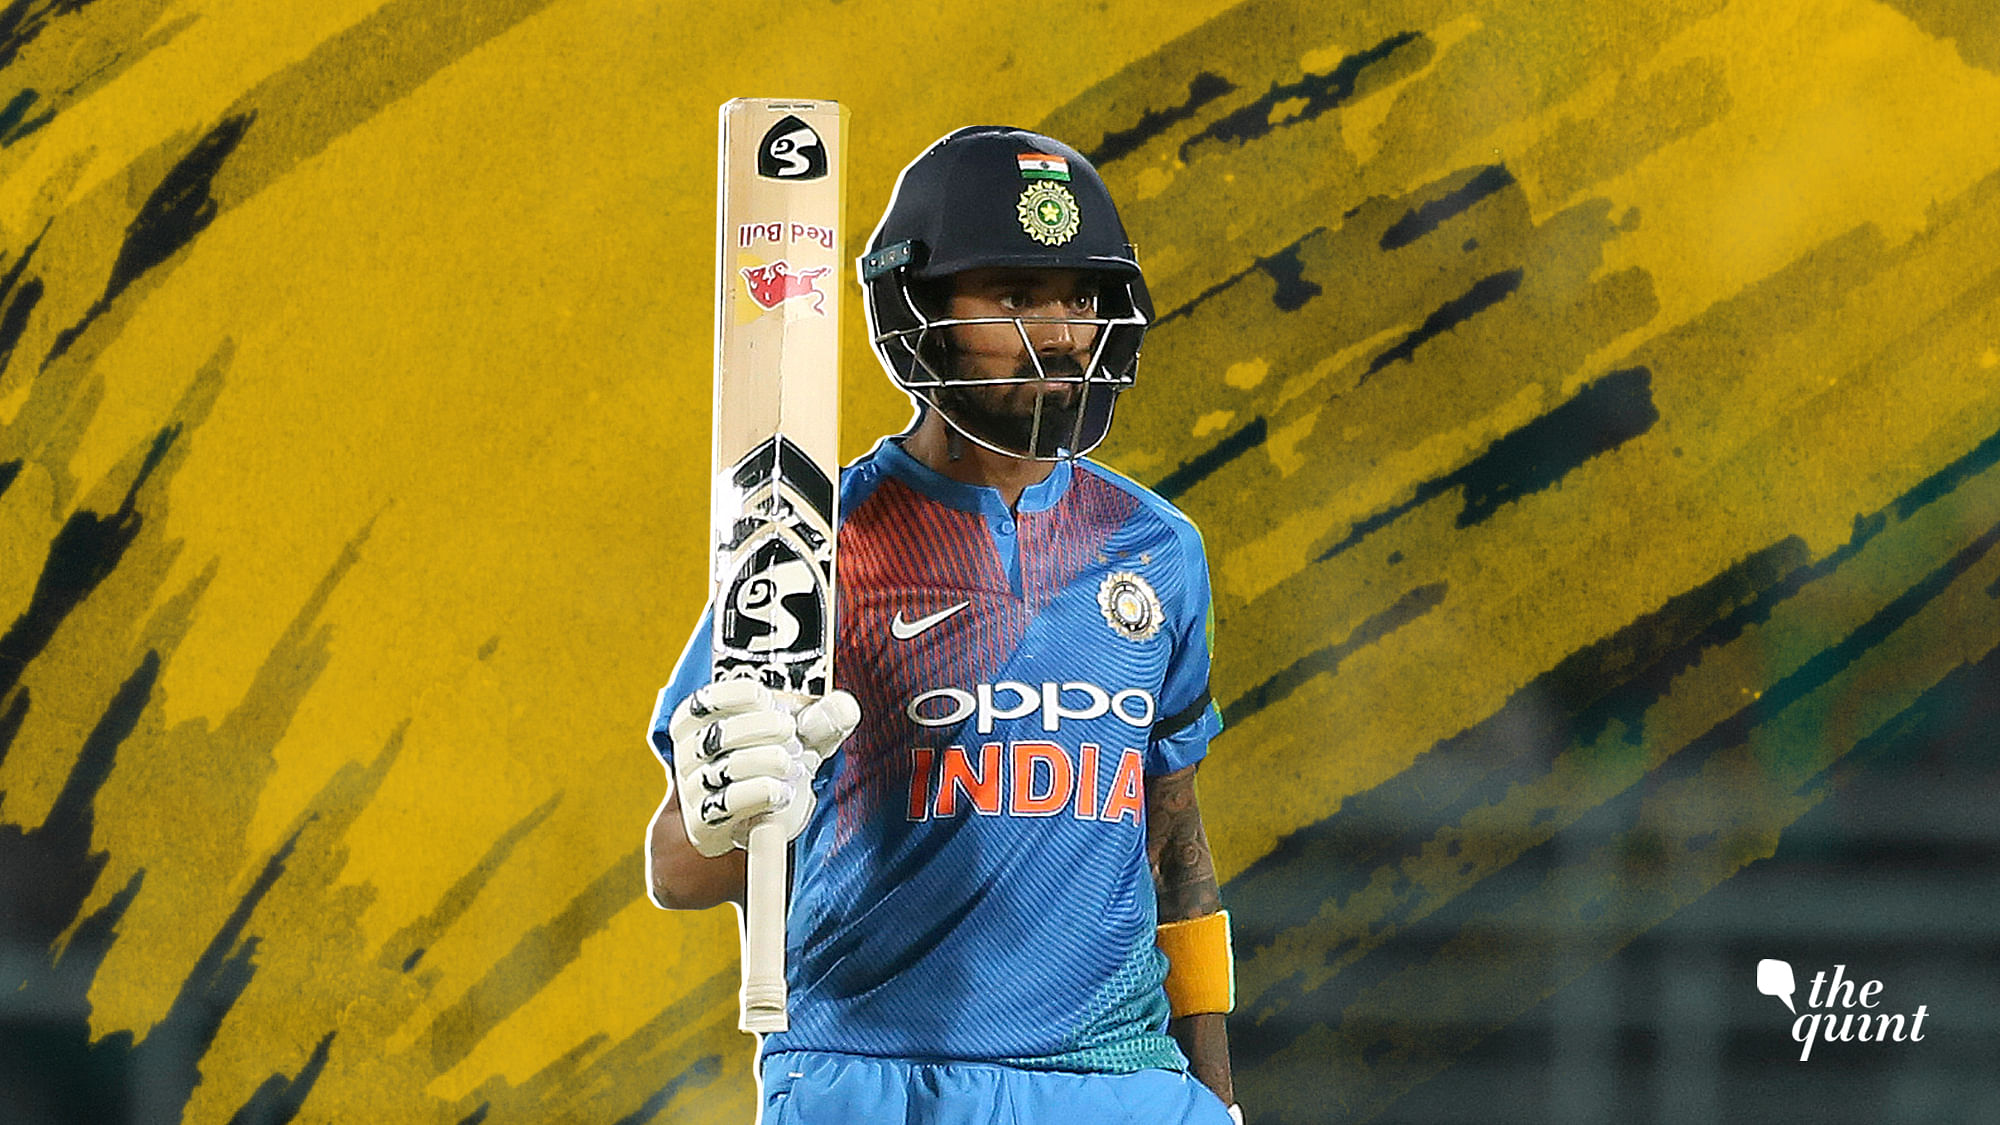 When KL Rahul reached his half-century in the first T20I against Australia at Visakhapatnam, it helped in easing up his nerves a lot.